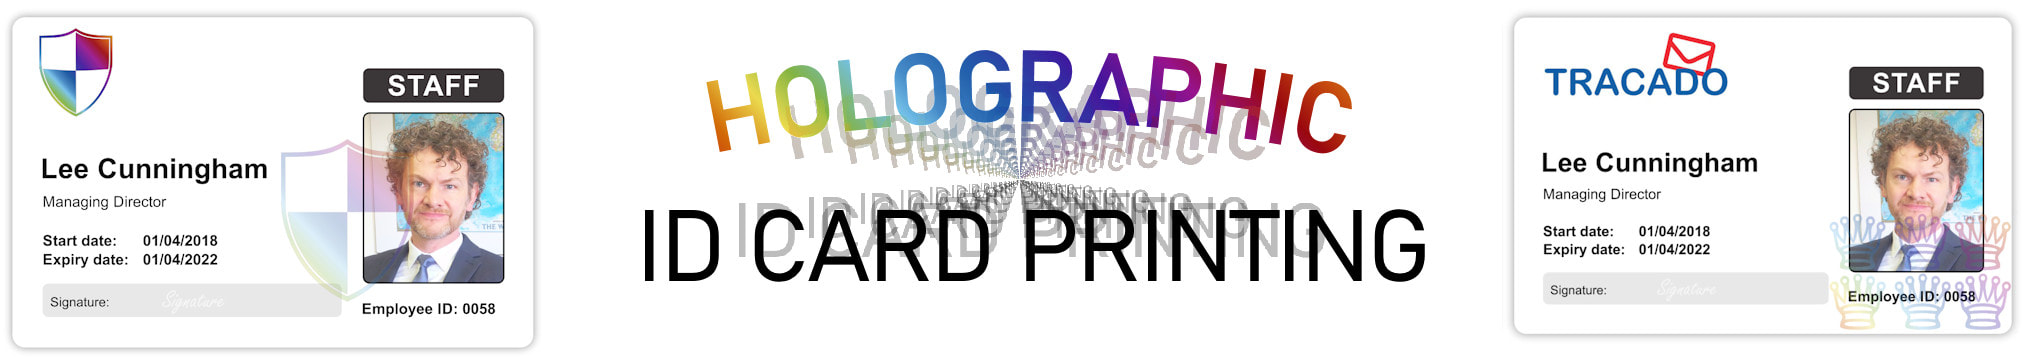 UK printer of holographic ID card print service. Employee Identity cards with hologram or holograph security mark.